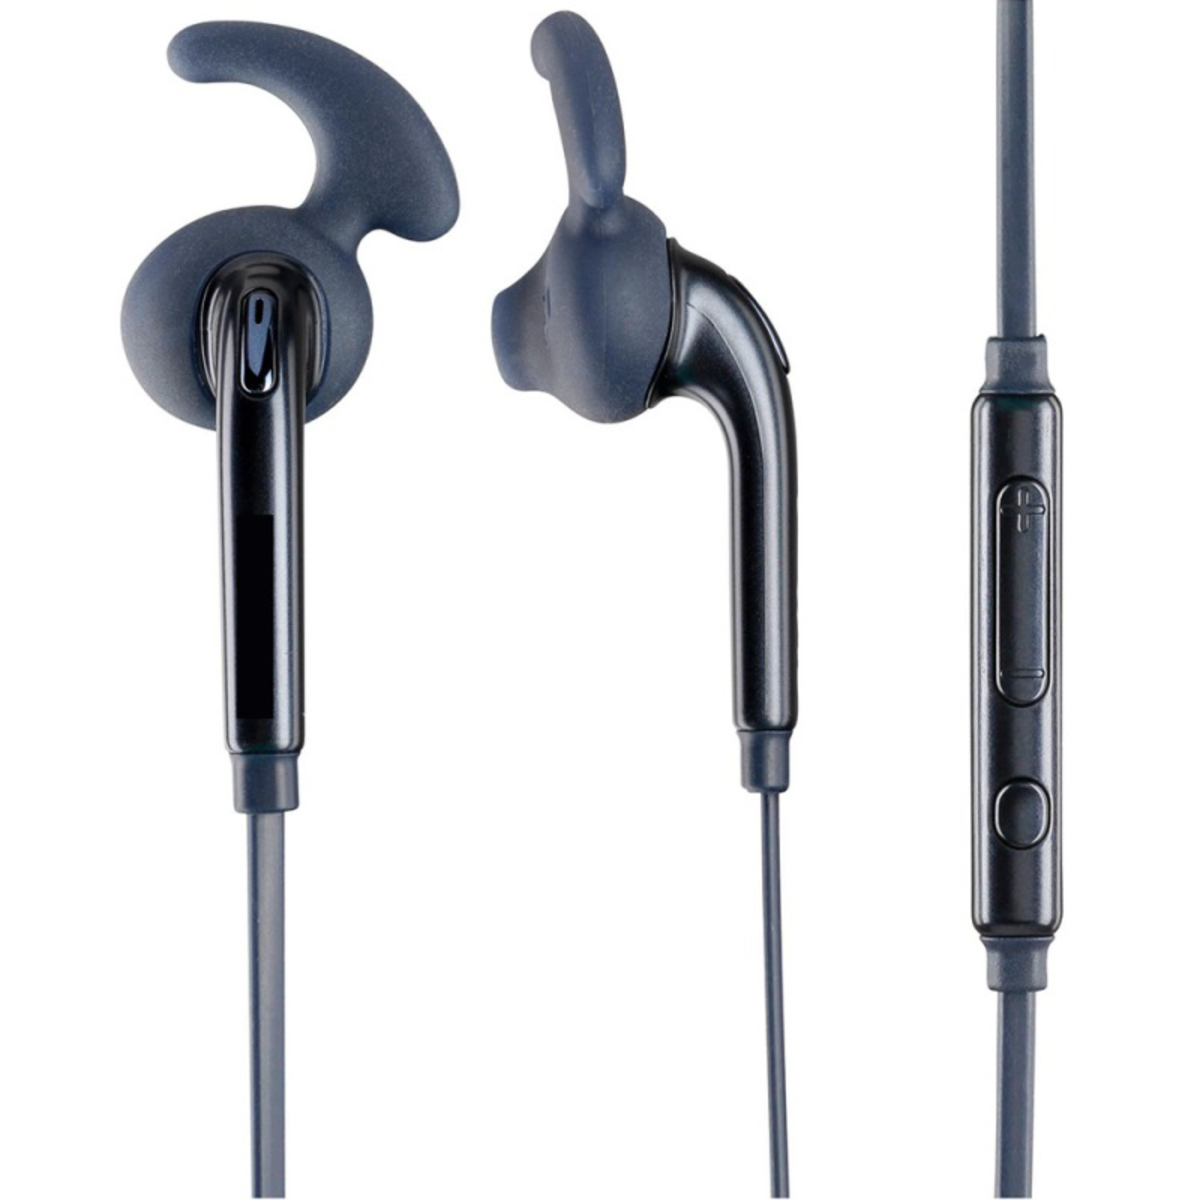 Iends Stereo Earphone with Microphone, Black, IE-HS672 Online at